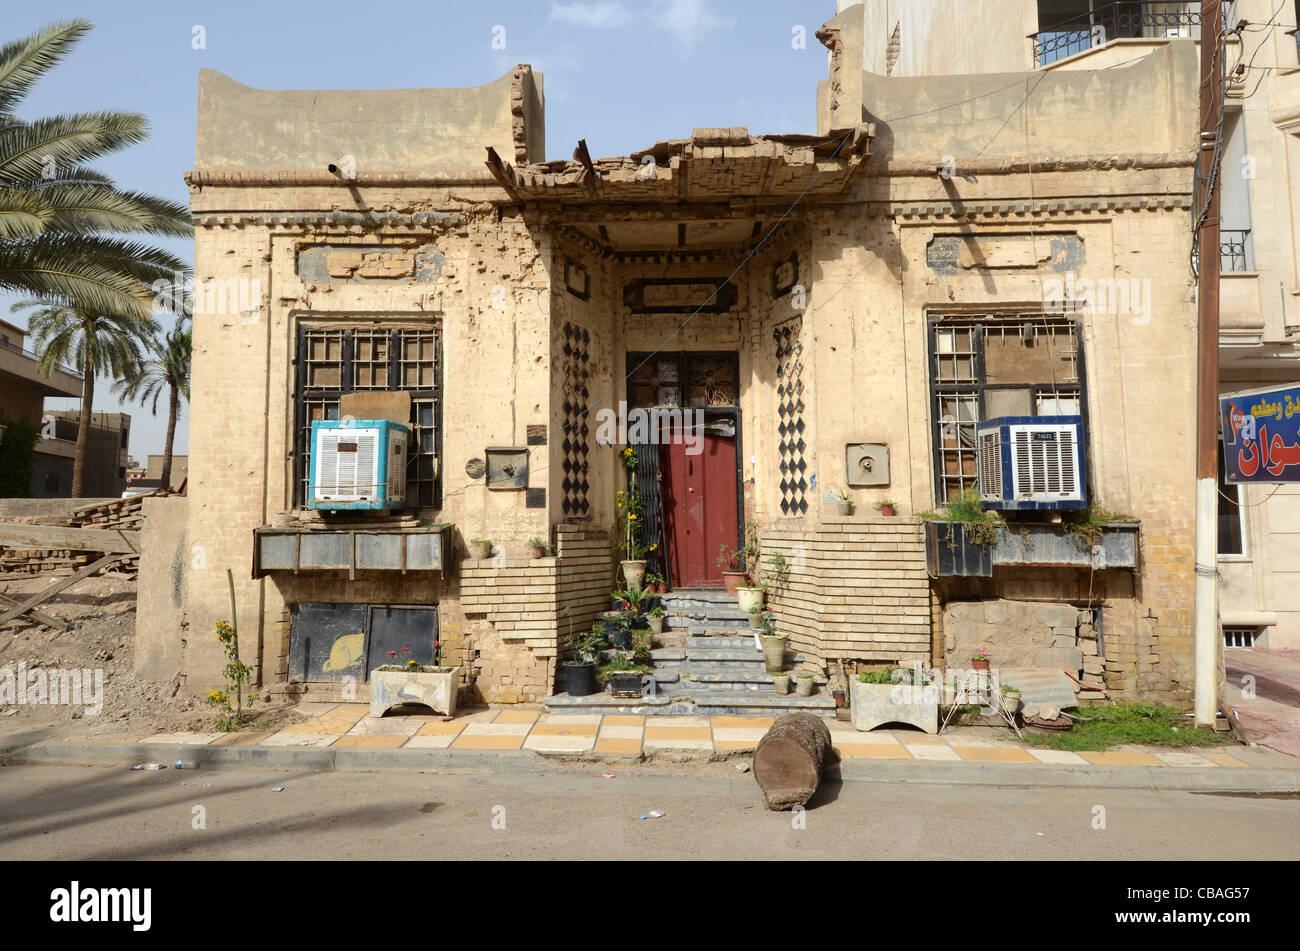 An old house with marks of combat, Baghdad, Iraq Stock Photo